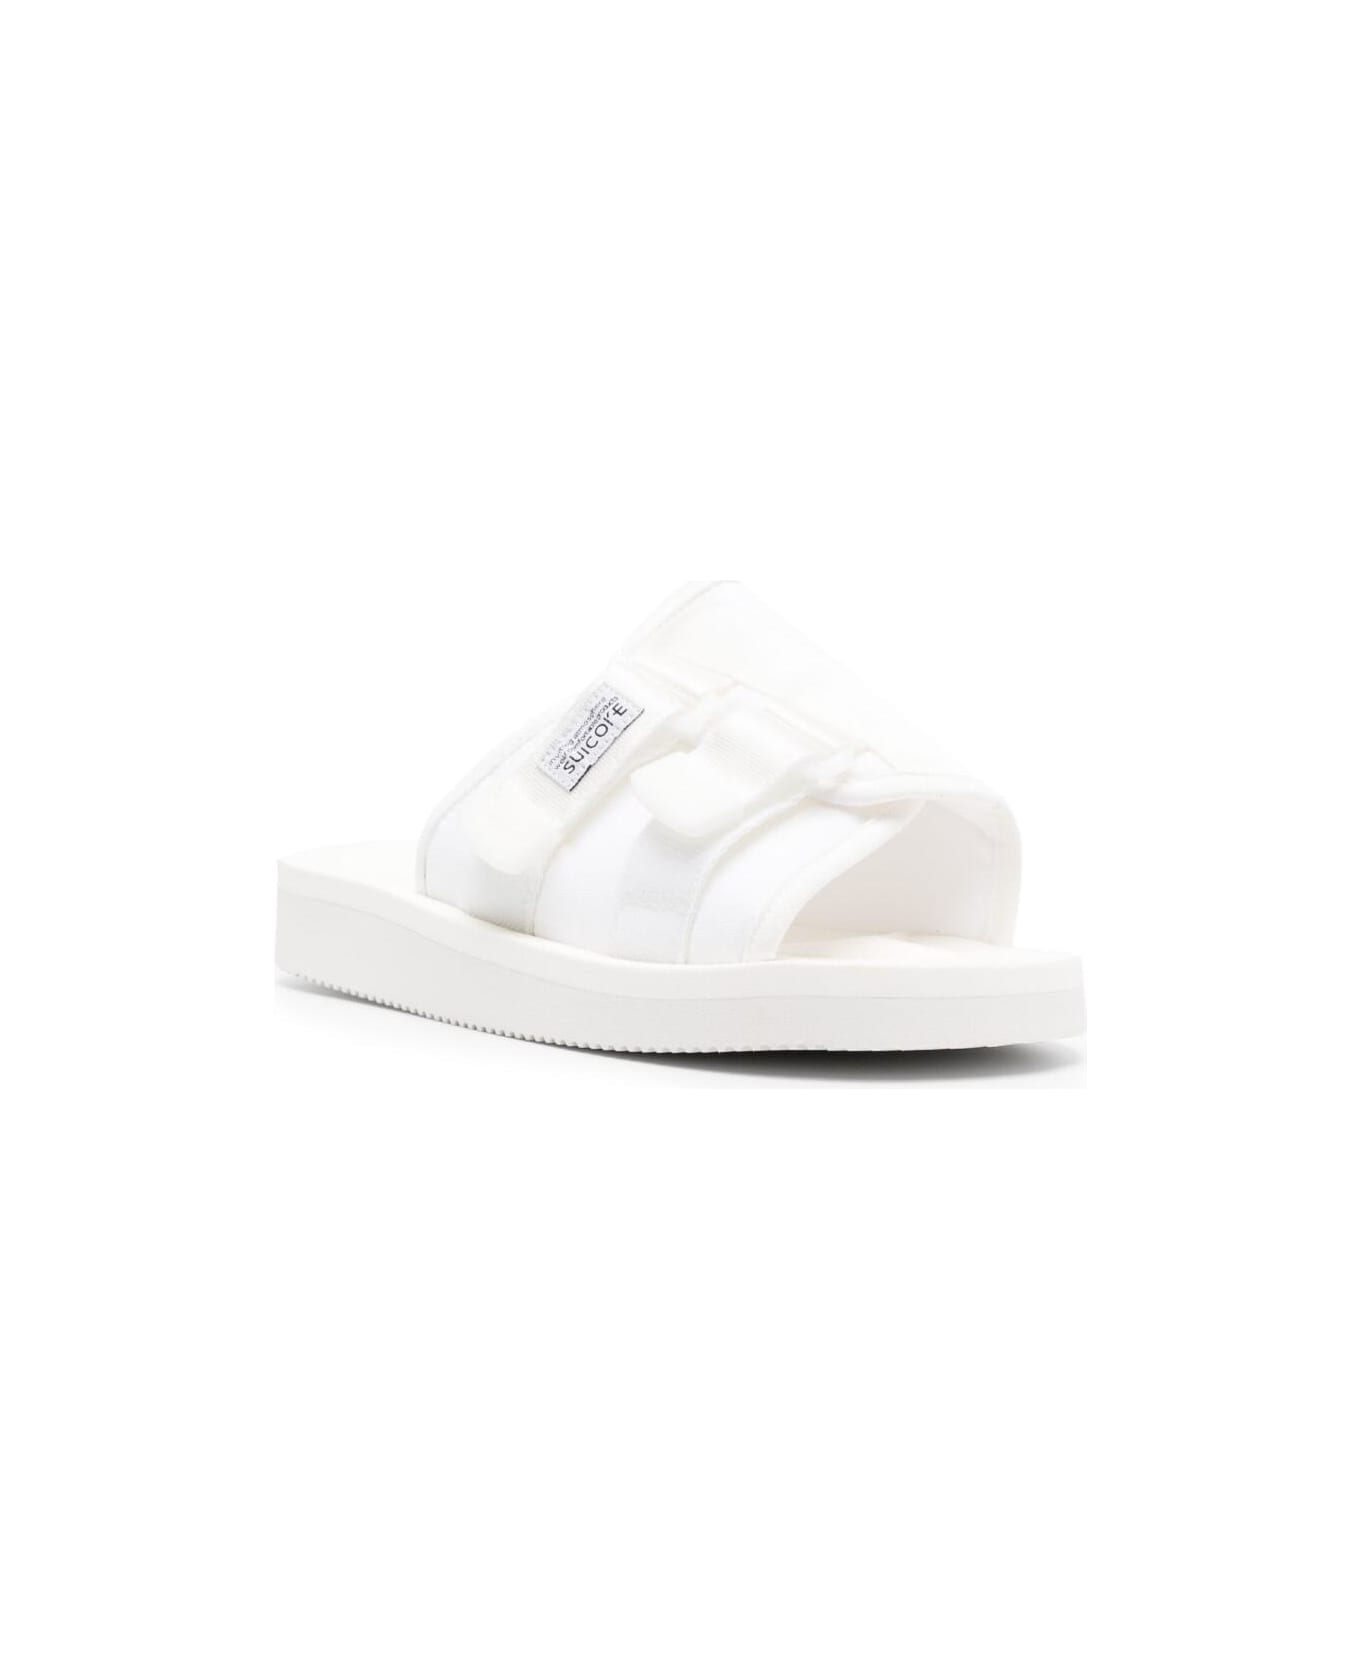 SUICOKE 'kaw-cab' White Sandals With Velcro Fastening In Nylon Man Suicoke - White その他各種シューズ